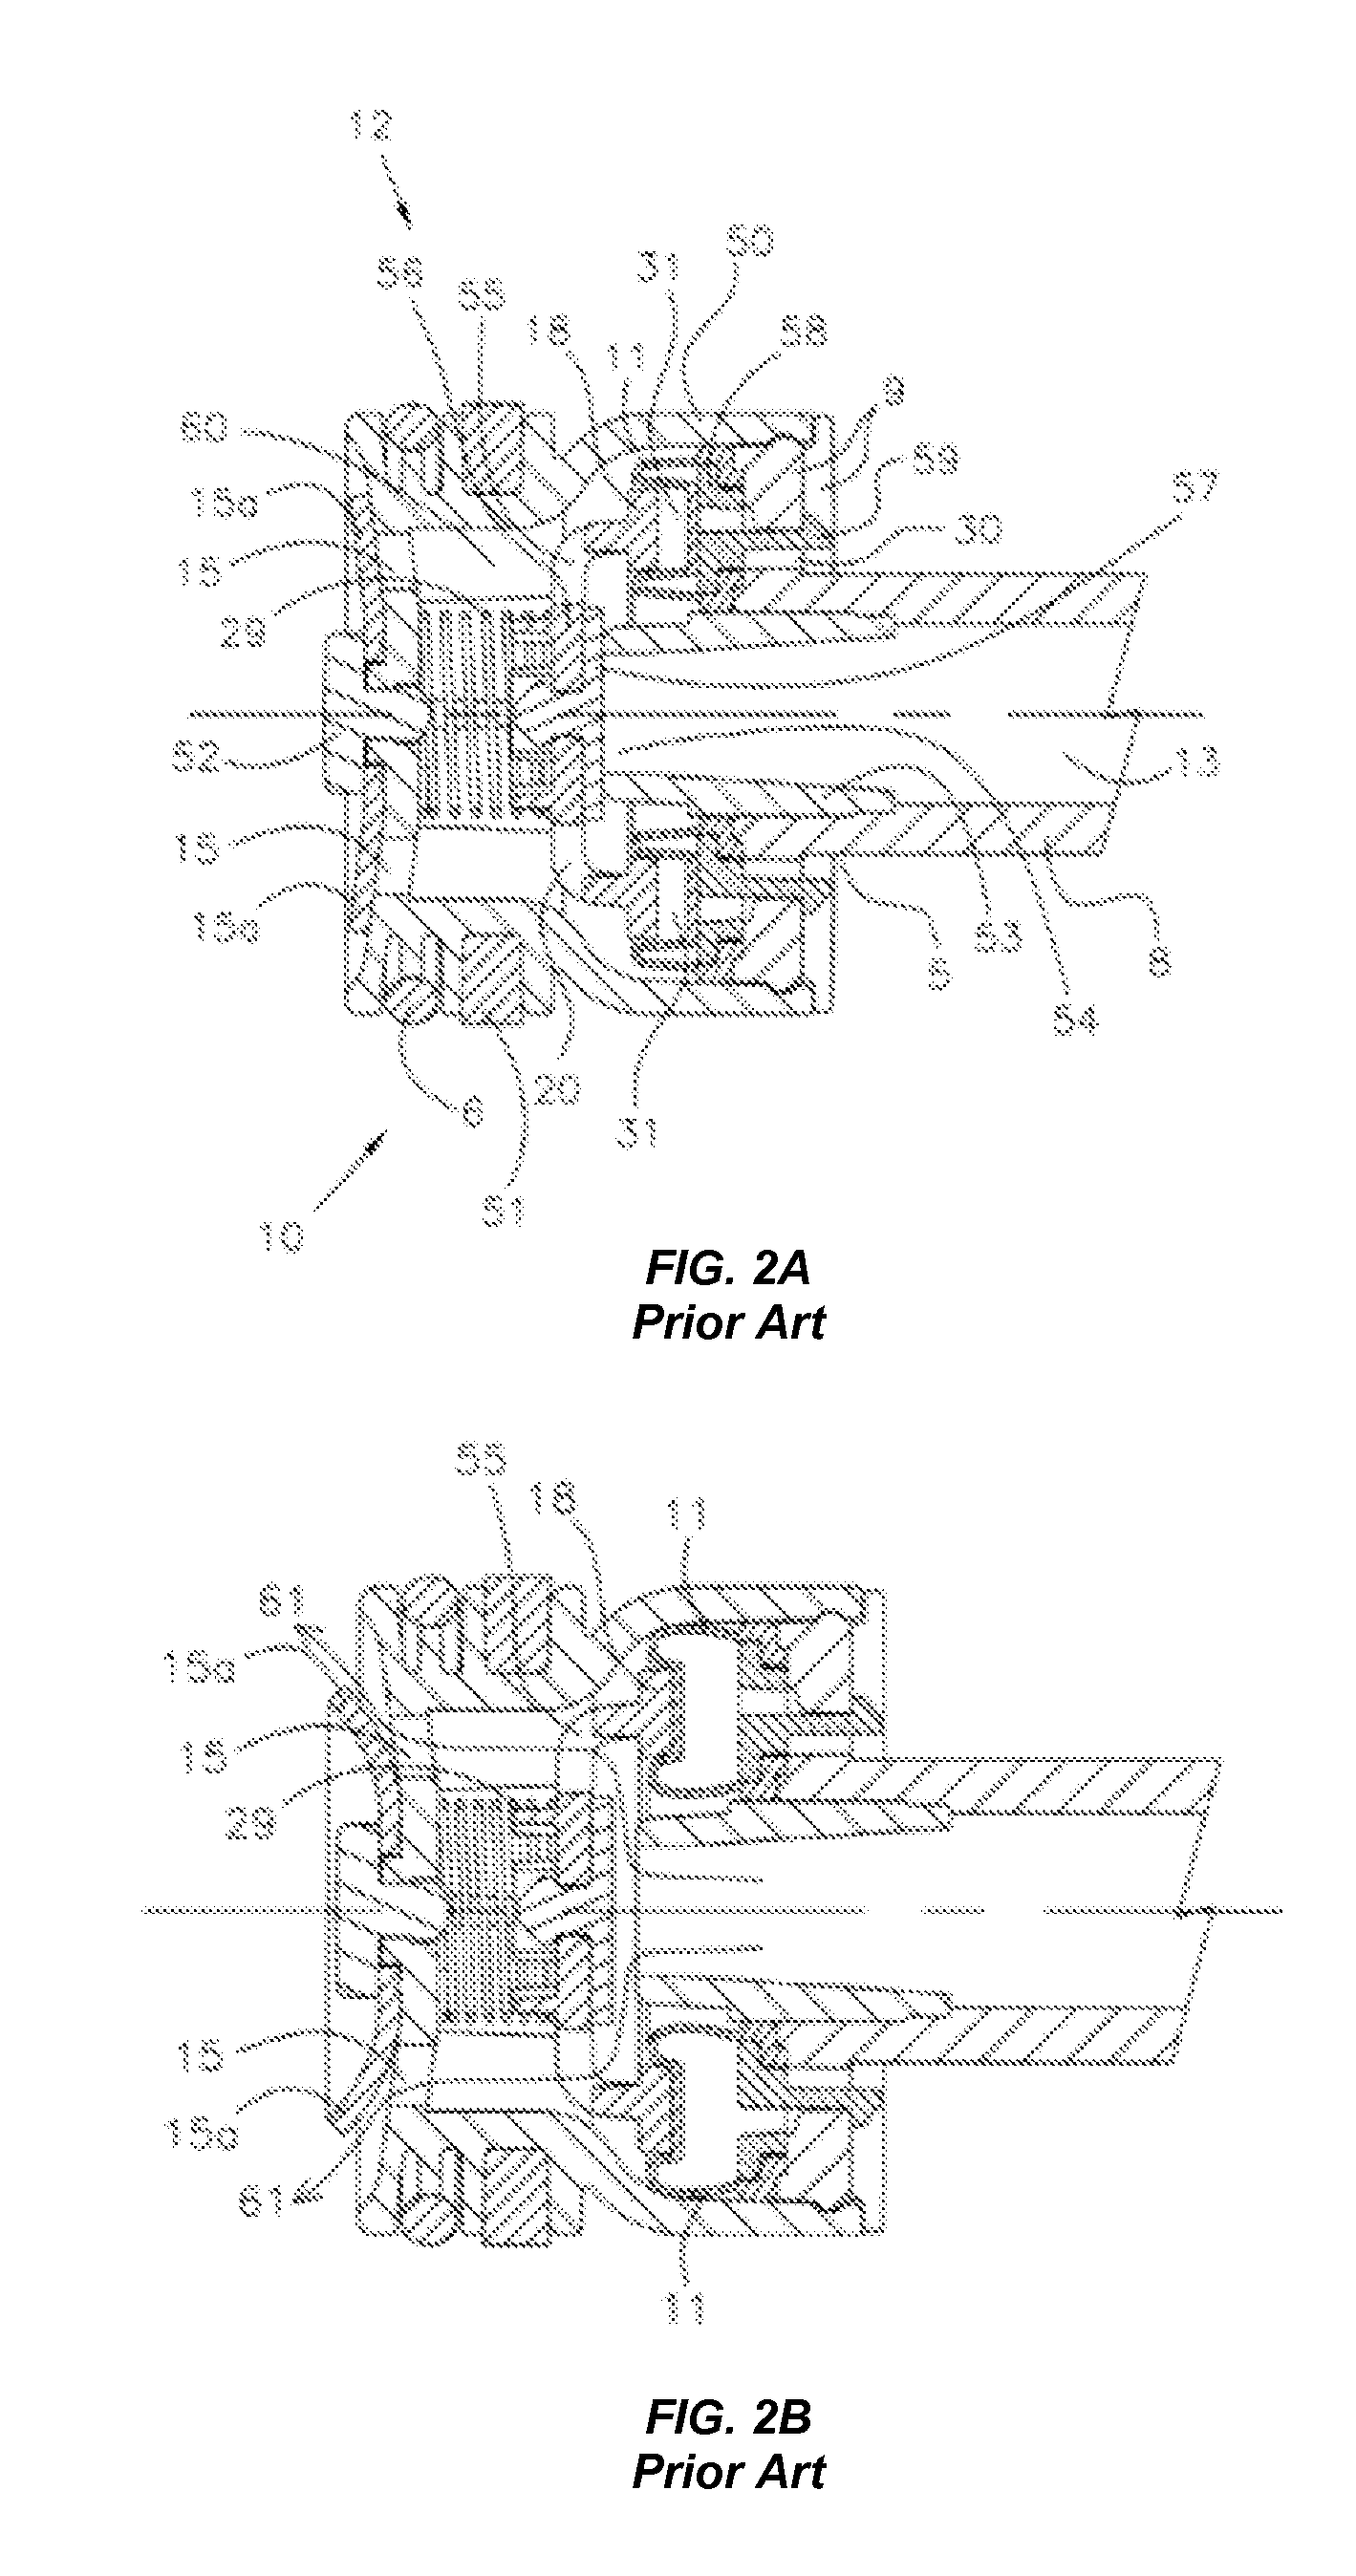 Multi-chamber, Multi-formulation Fluid Delivery System